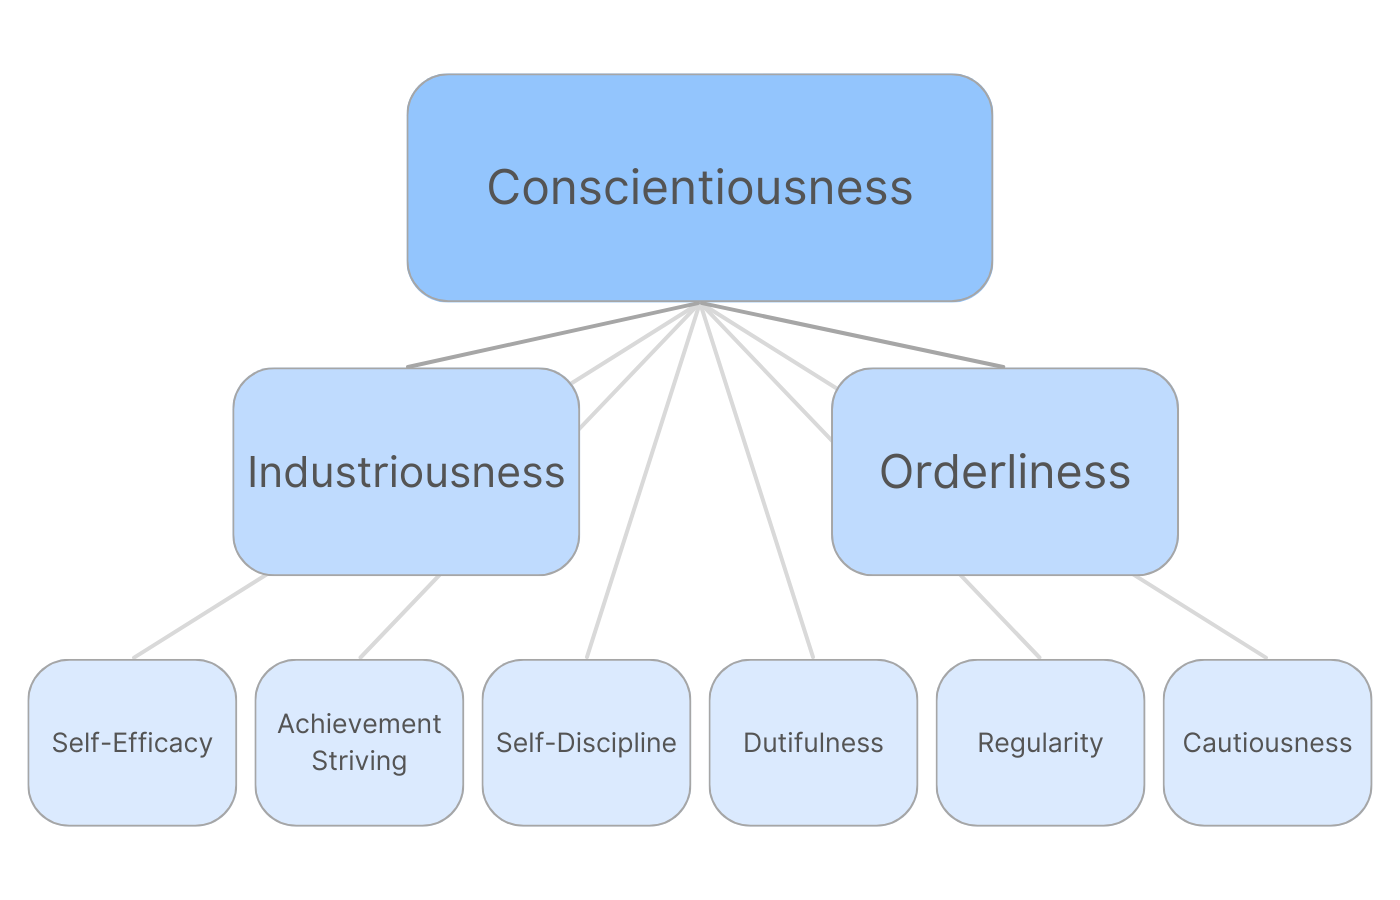 The Conscientiousness dimension and its aspects and facets